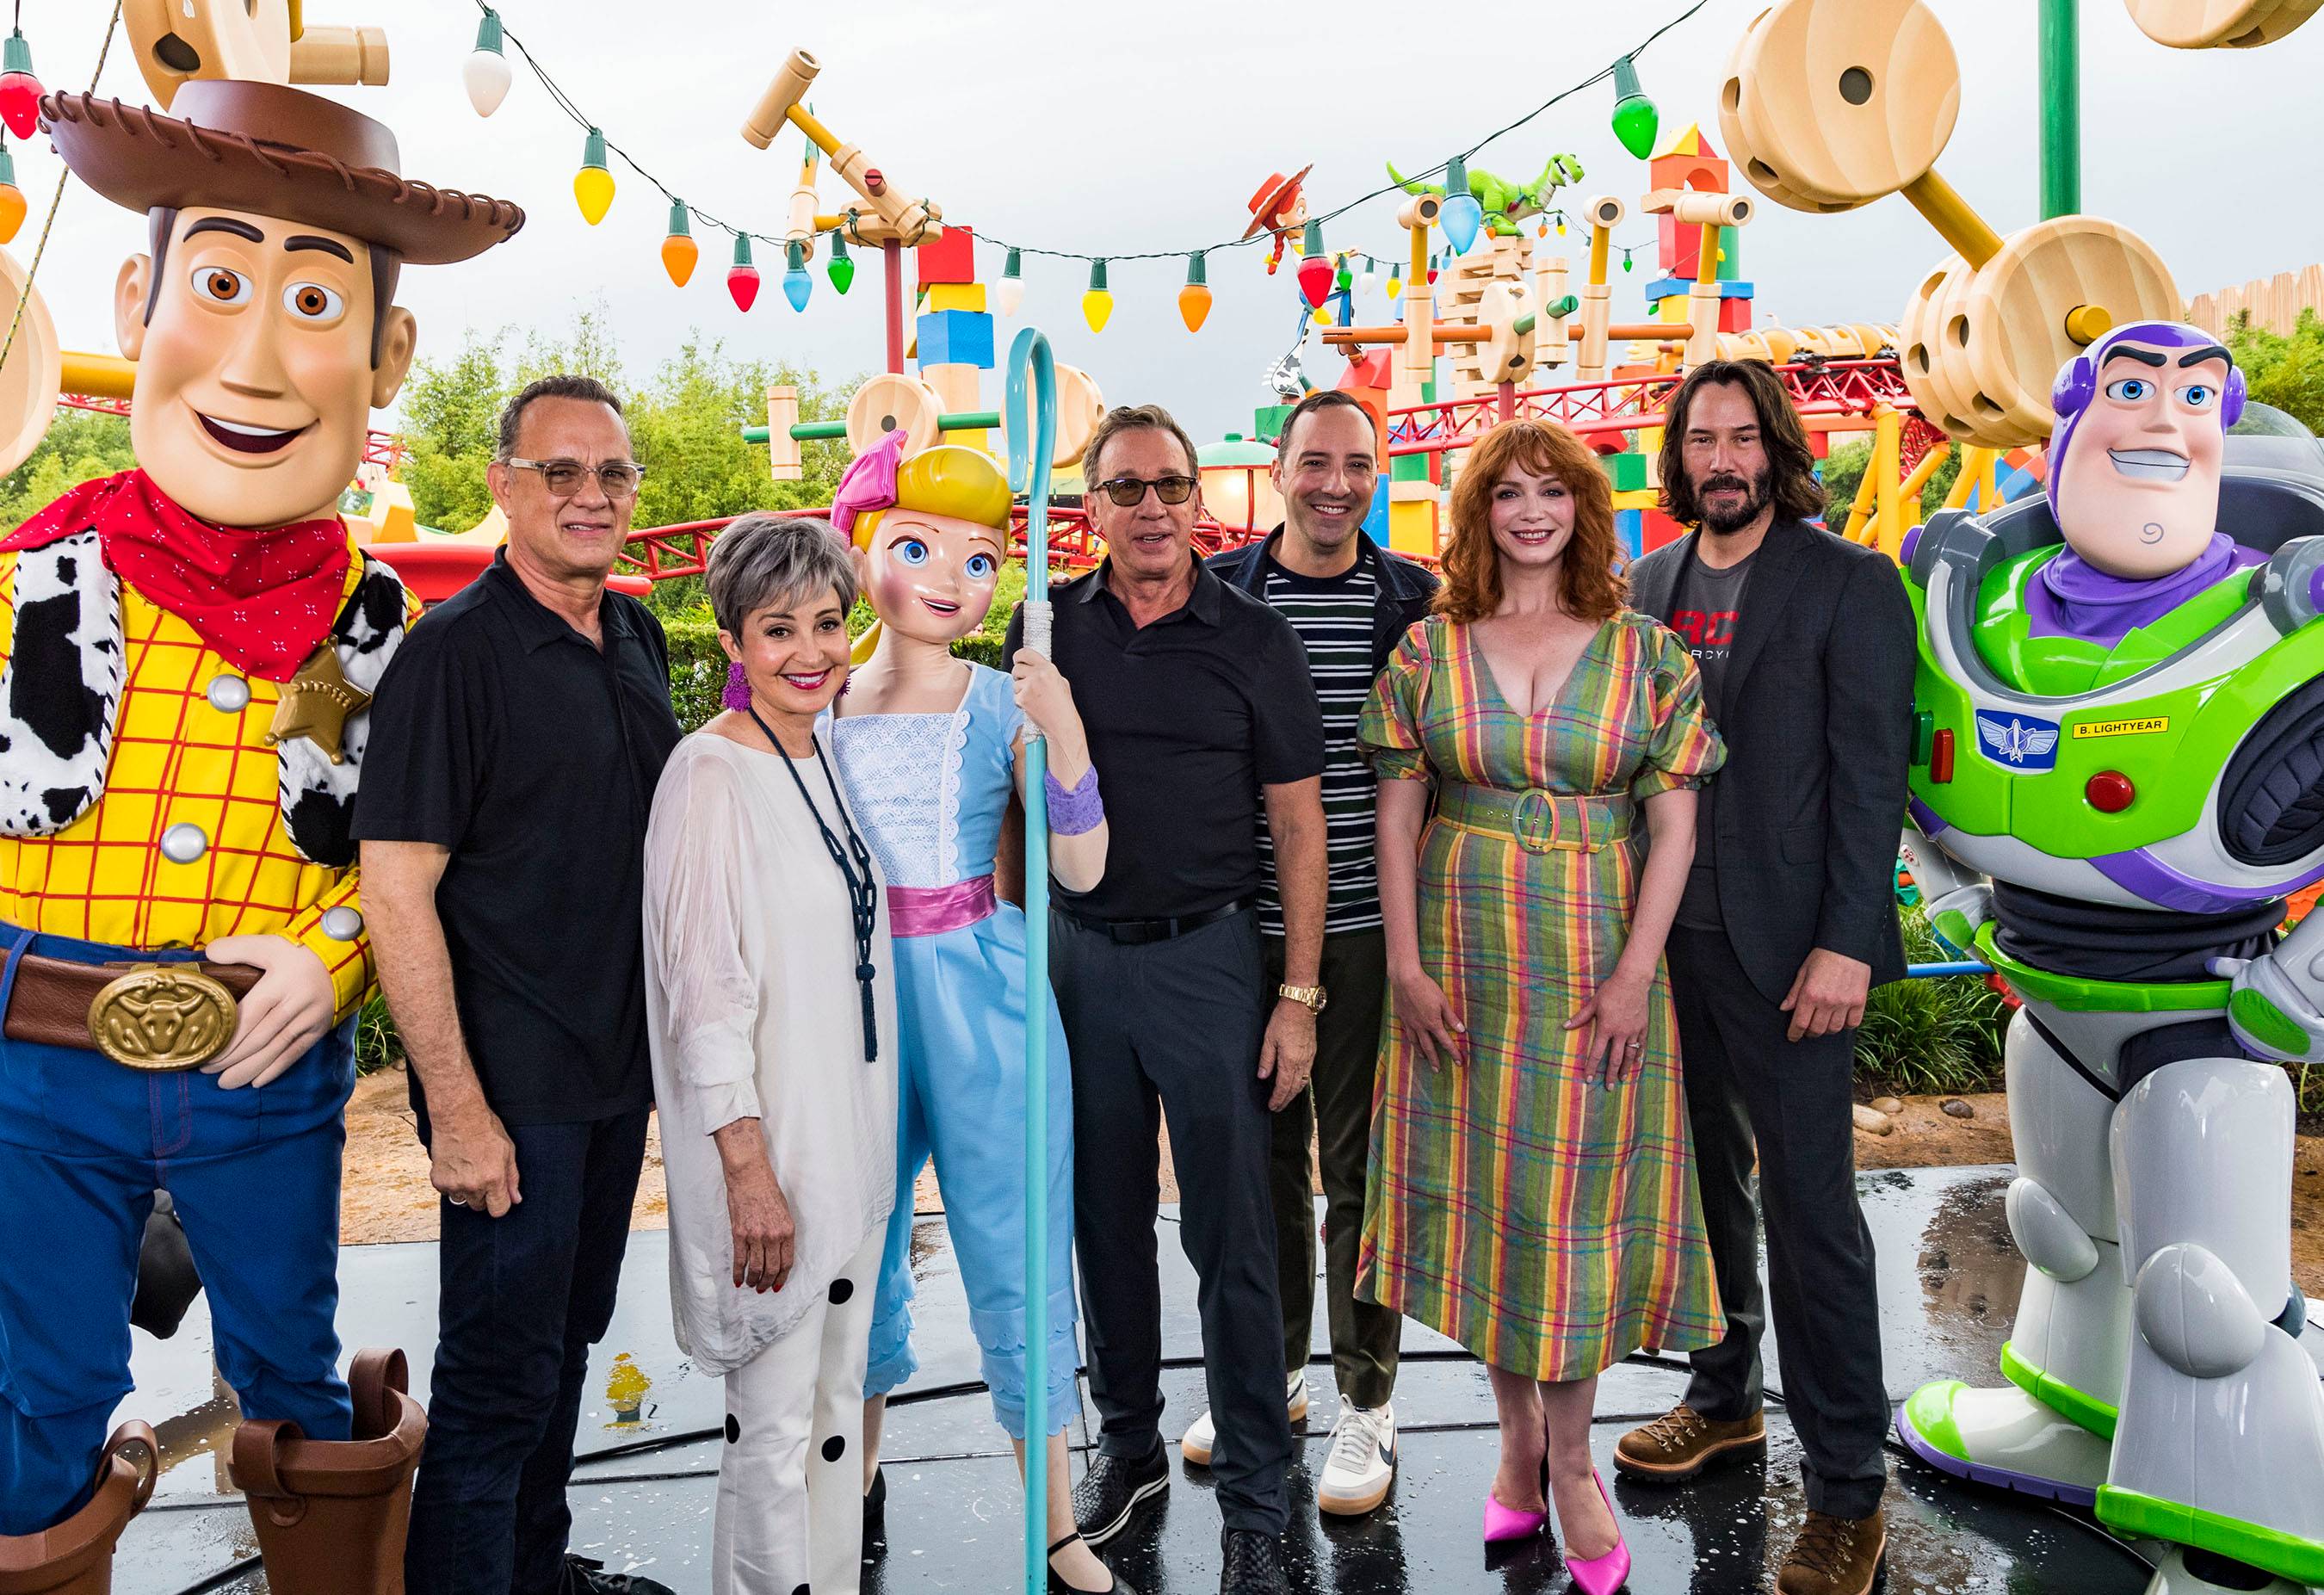 Stars from Disney•Pixar’s “Toy Story 4” appear with characters from the film inside Toy Story Land at Disney’s Hollywood Studios at Walt Disney World Resort in Lake Buena Vista, Fla., June 8, 2019. From left: Woody, Tom Hanks, Annie Potts, Bo Peep, Tim Allen, Tony Hale, Christina Hendricks, Keanu Reeves and Buzz Lightyear. (Matt Stroshane, photographer)